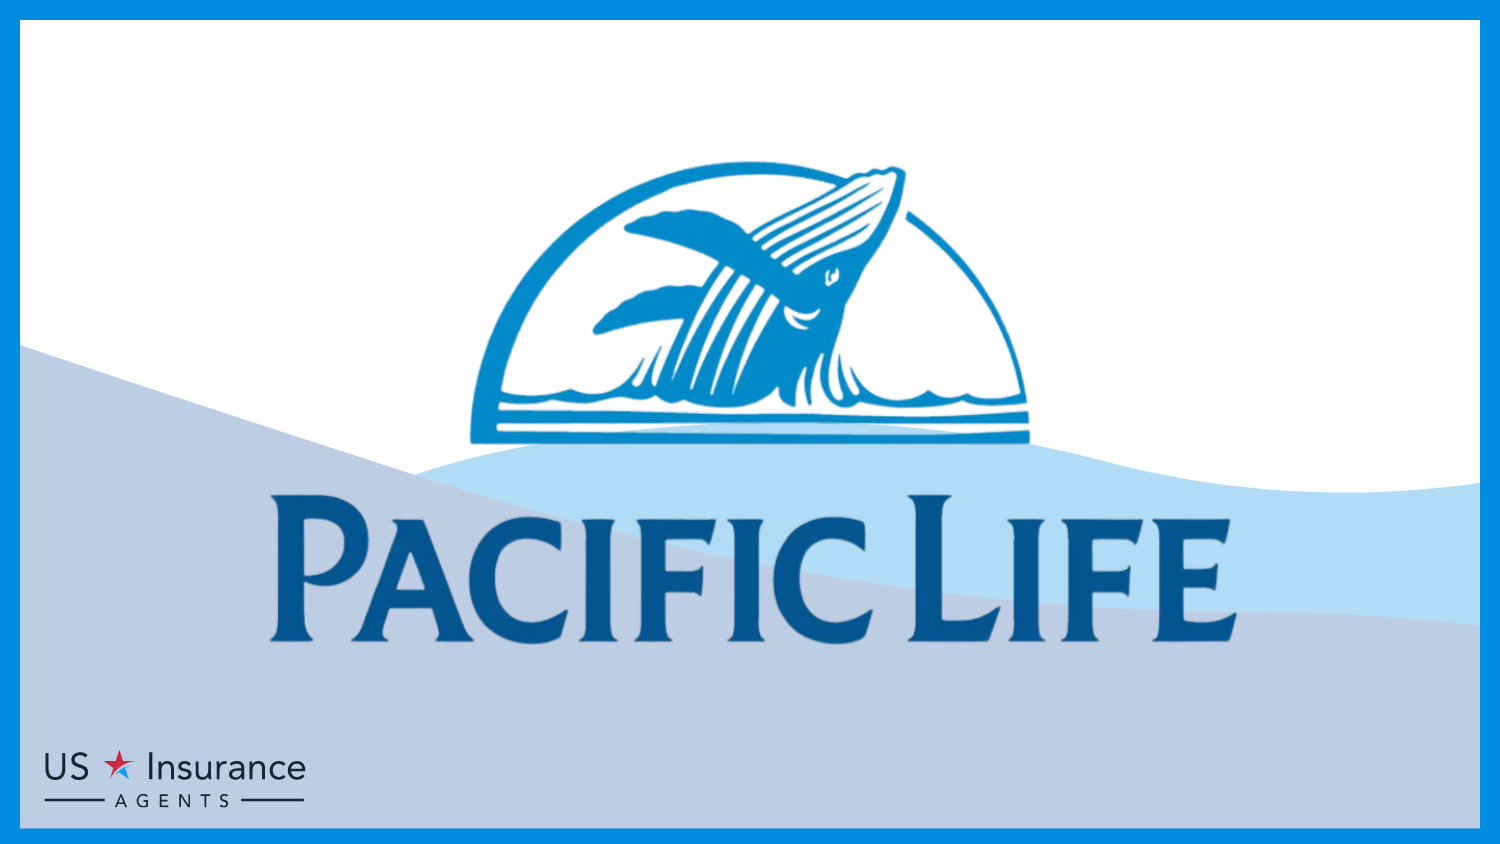 Pacific Life: Best Life Insurance for High-Net-Worth Individuals